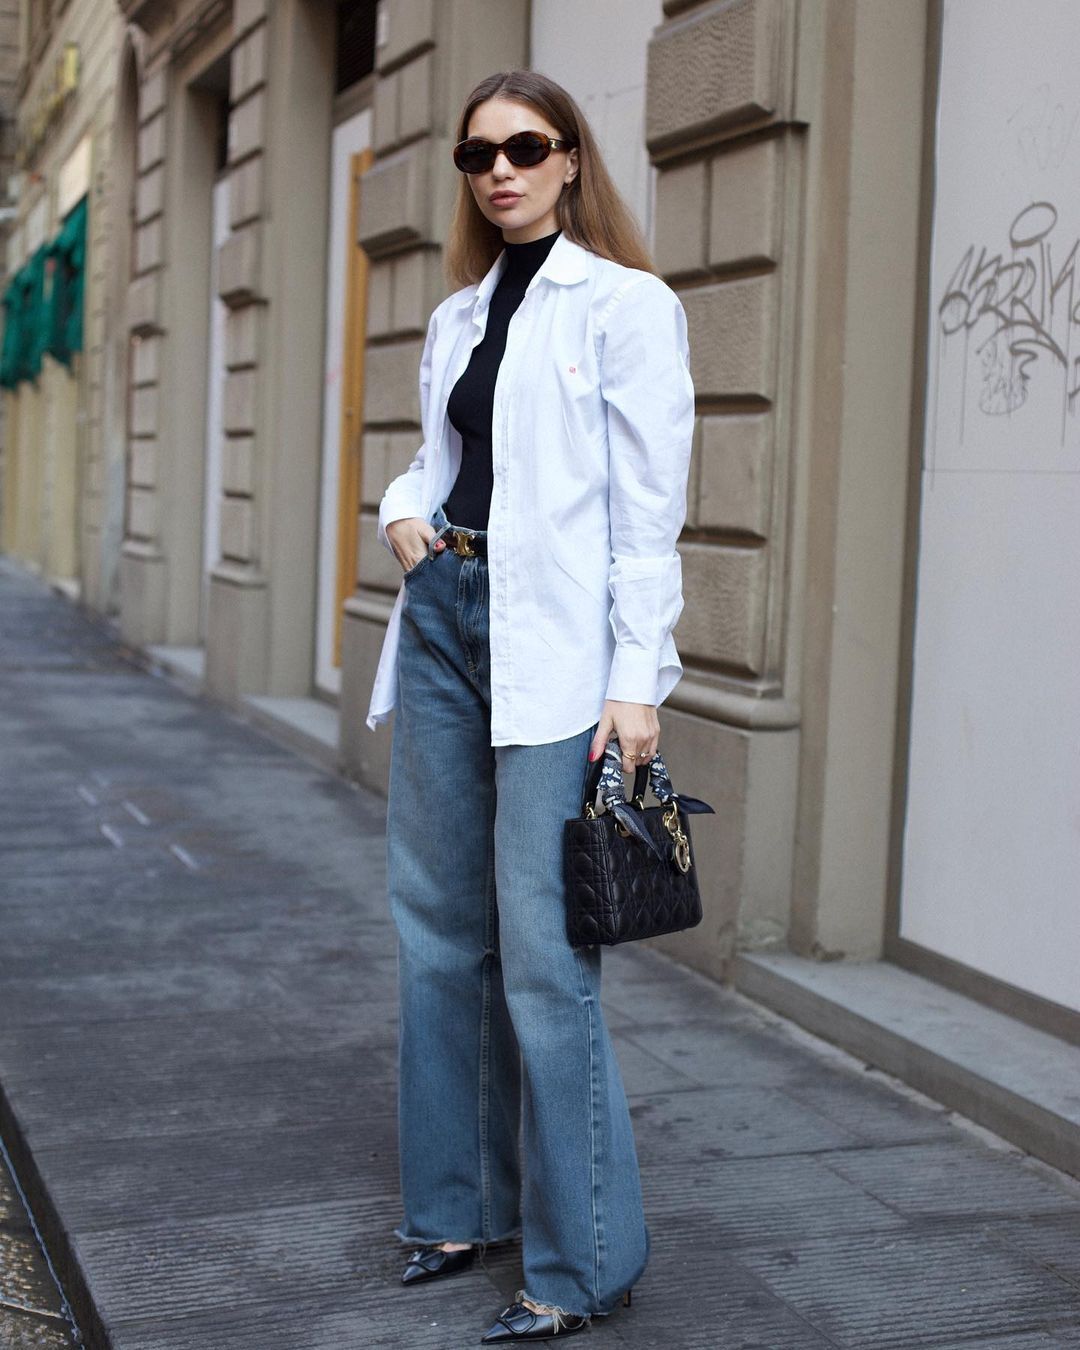 Beauty in simplicity: 5 combinations with jeans that won't go out of style for a long time